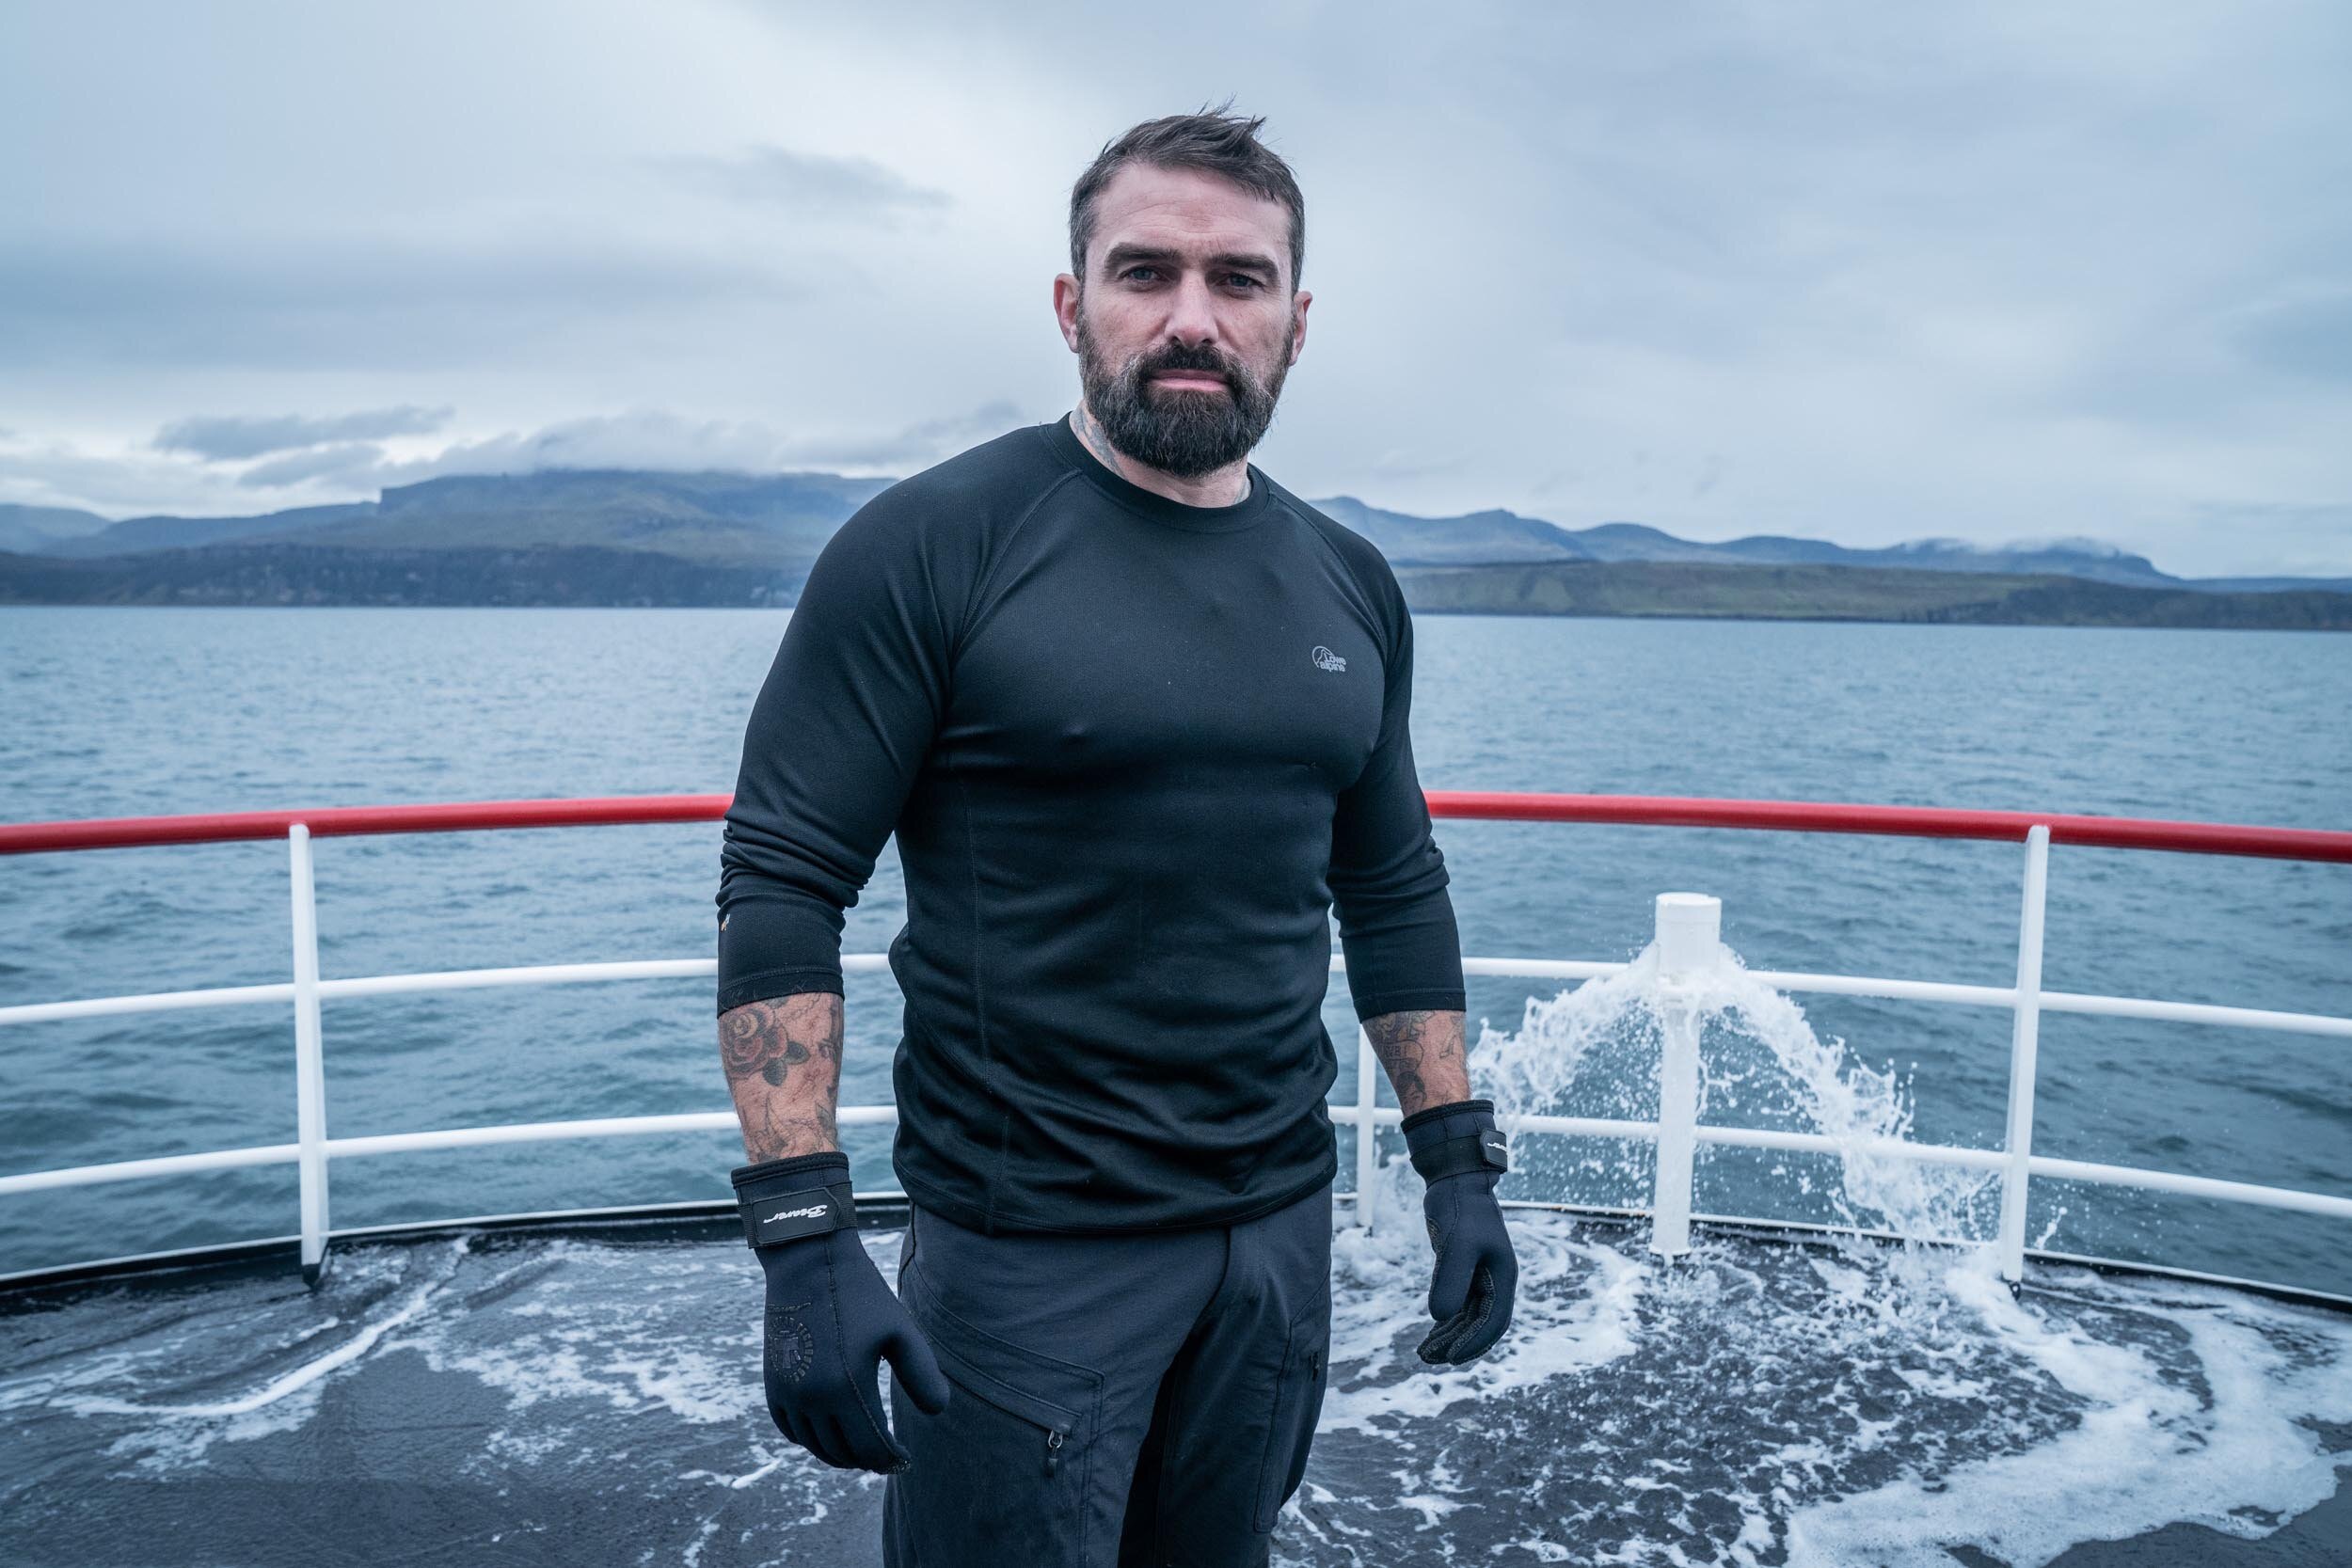  Chief Instructor Ant Middleton  Minnow Films / Channel 4 